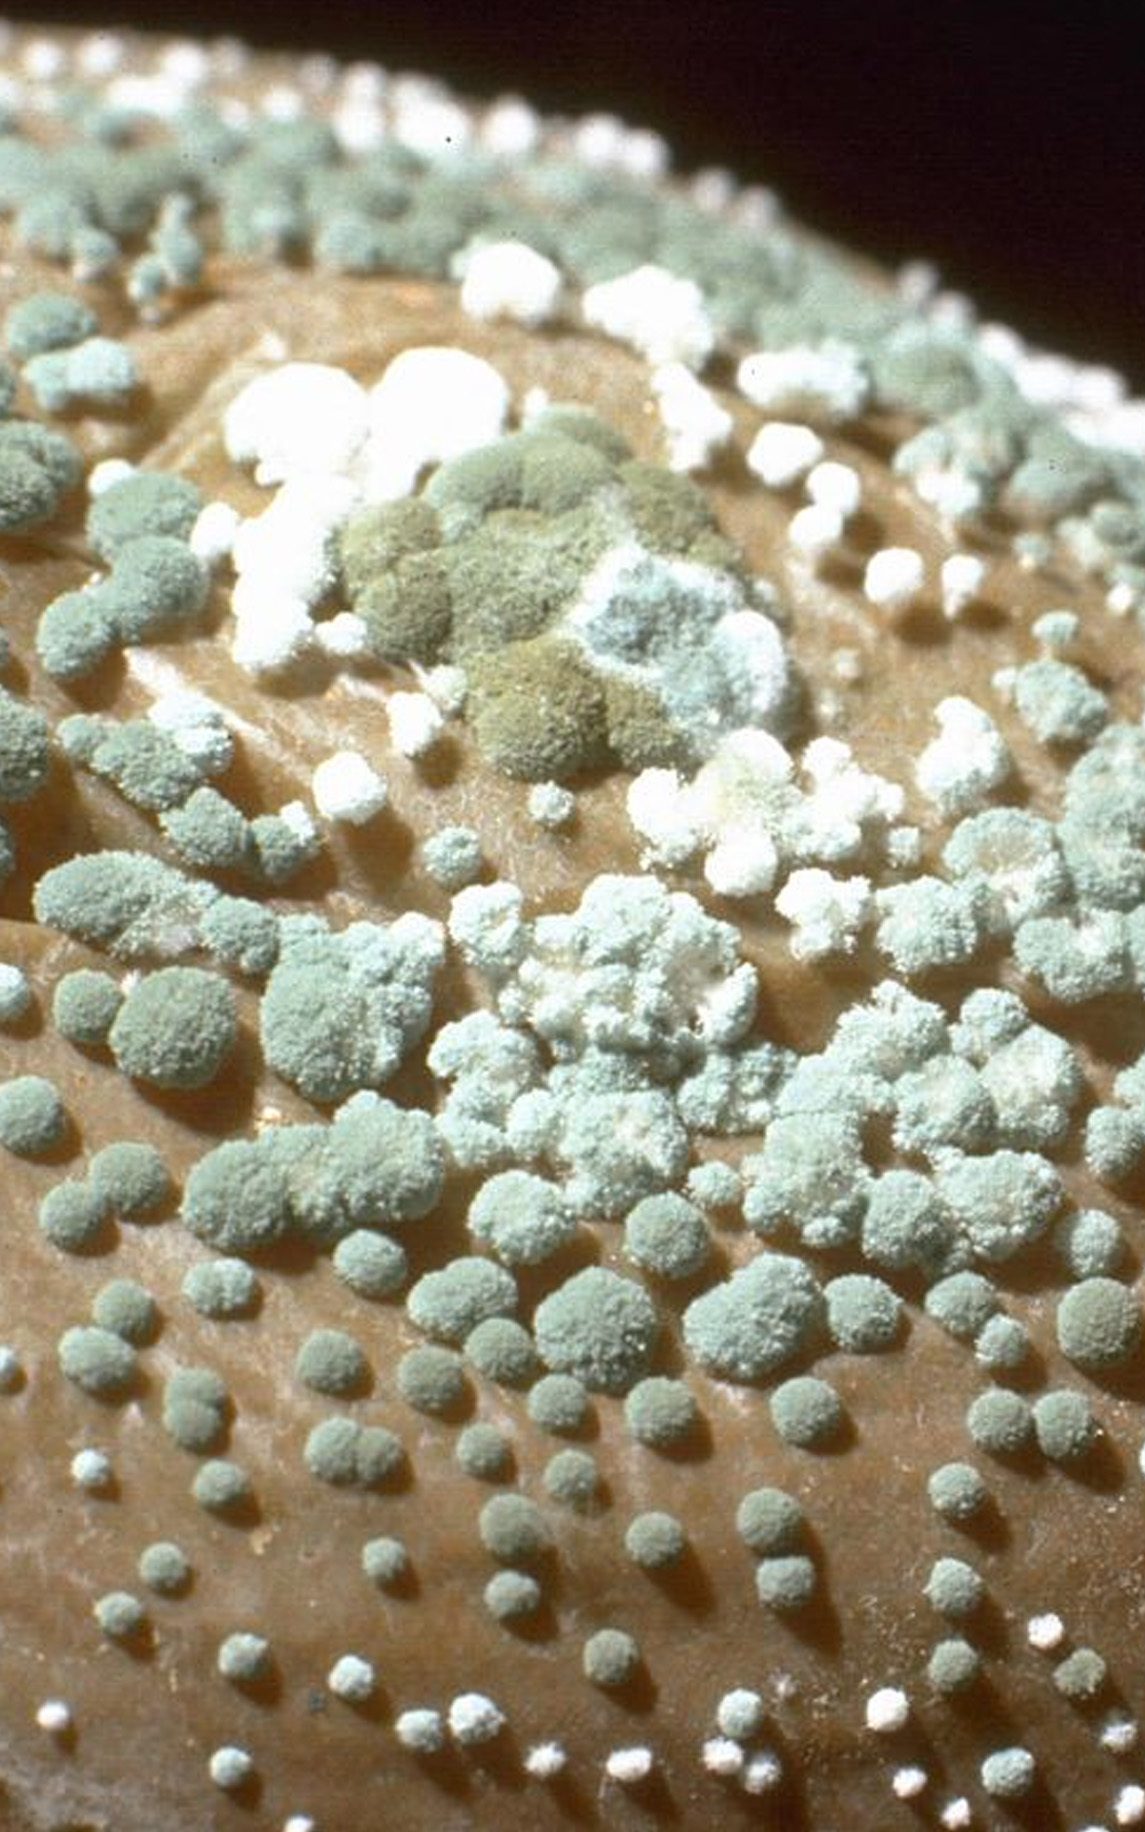 ERMI Testing for Mold - What is it and do you need it?